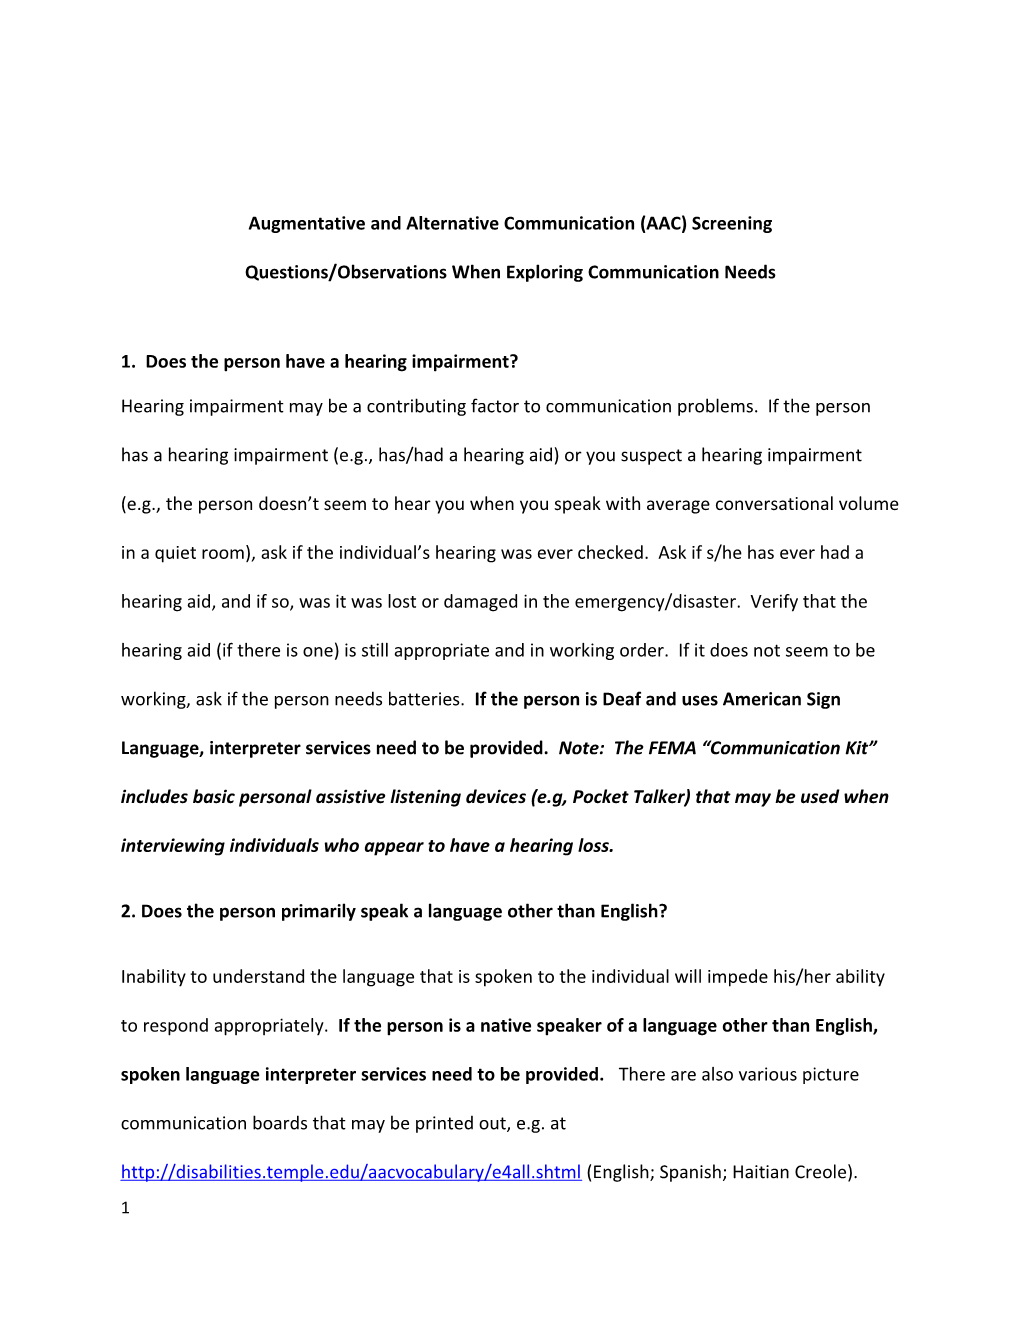 Questions/Observations When Exploring Communication Needs